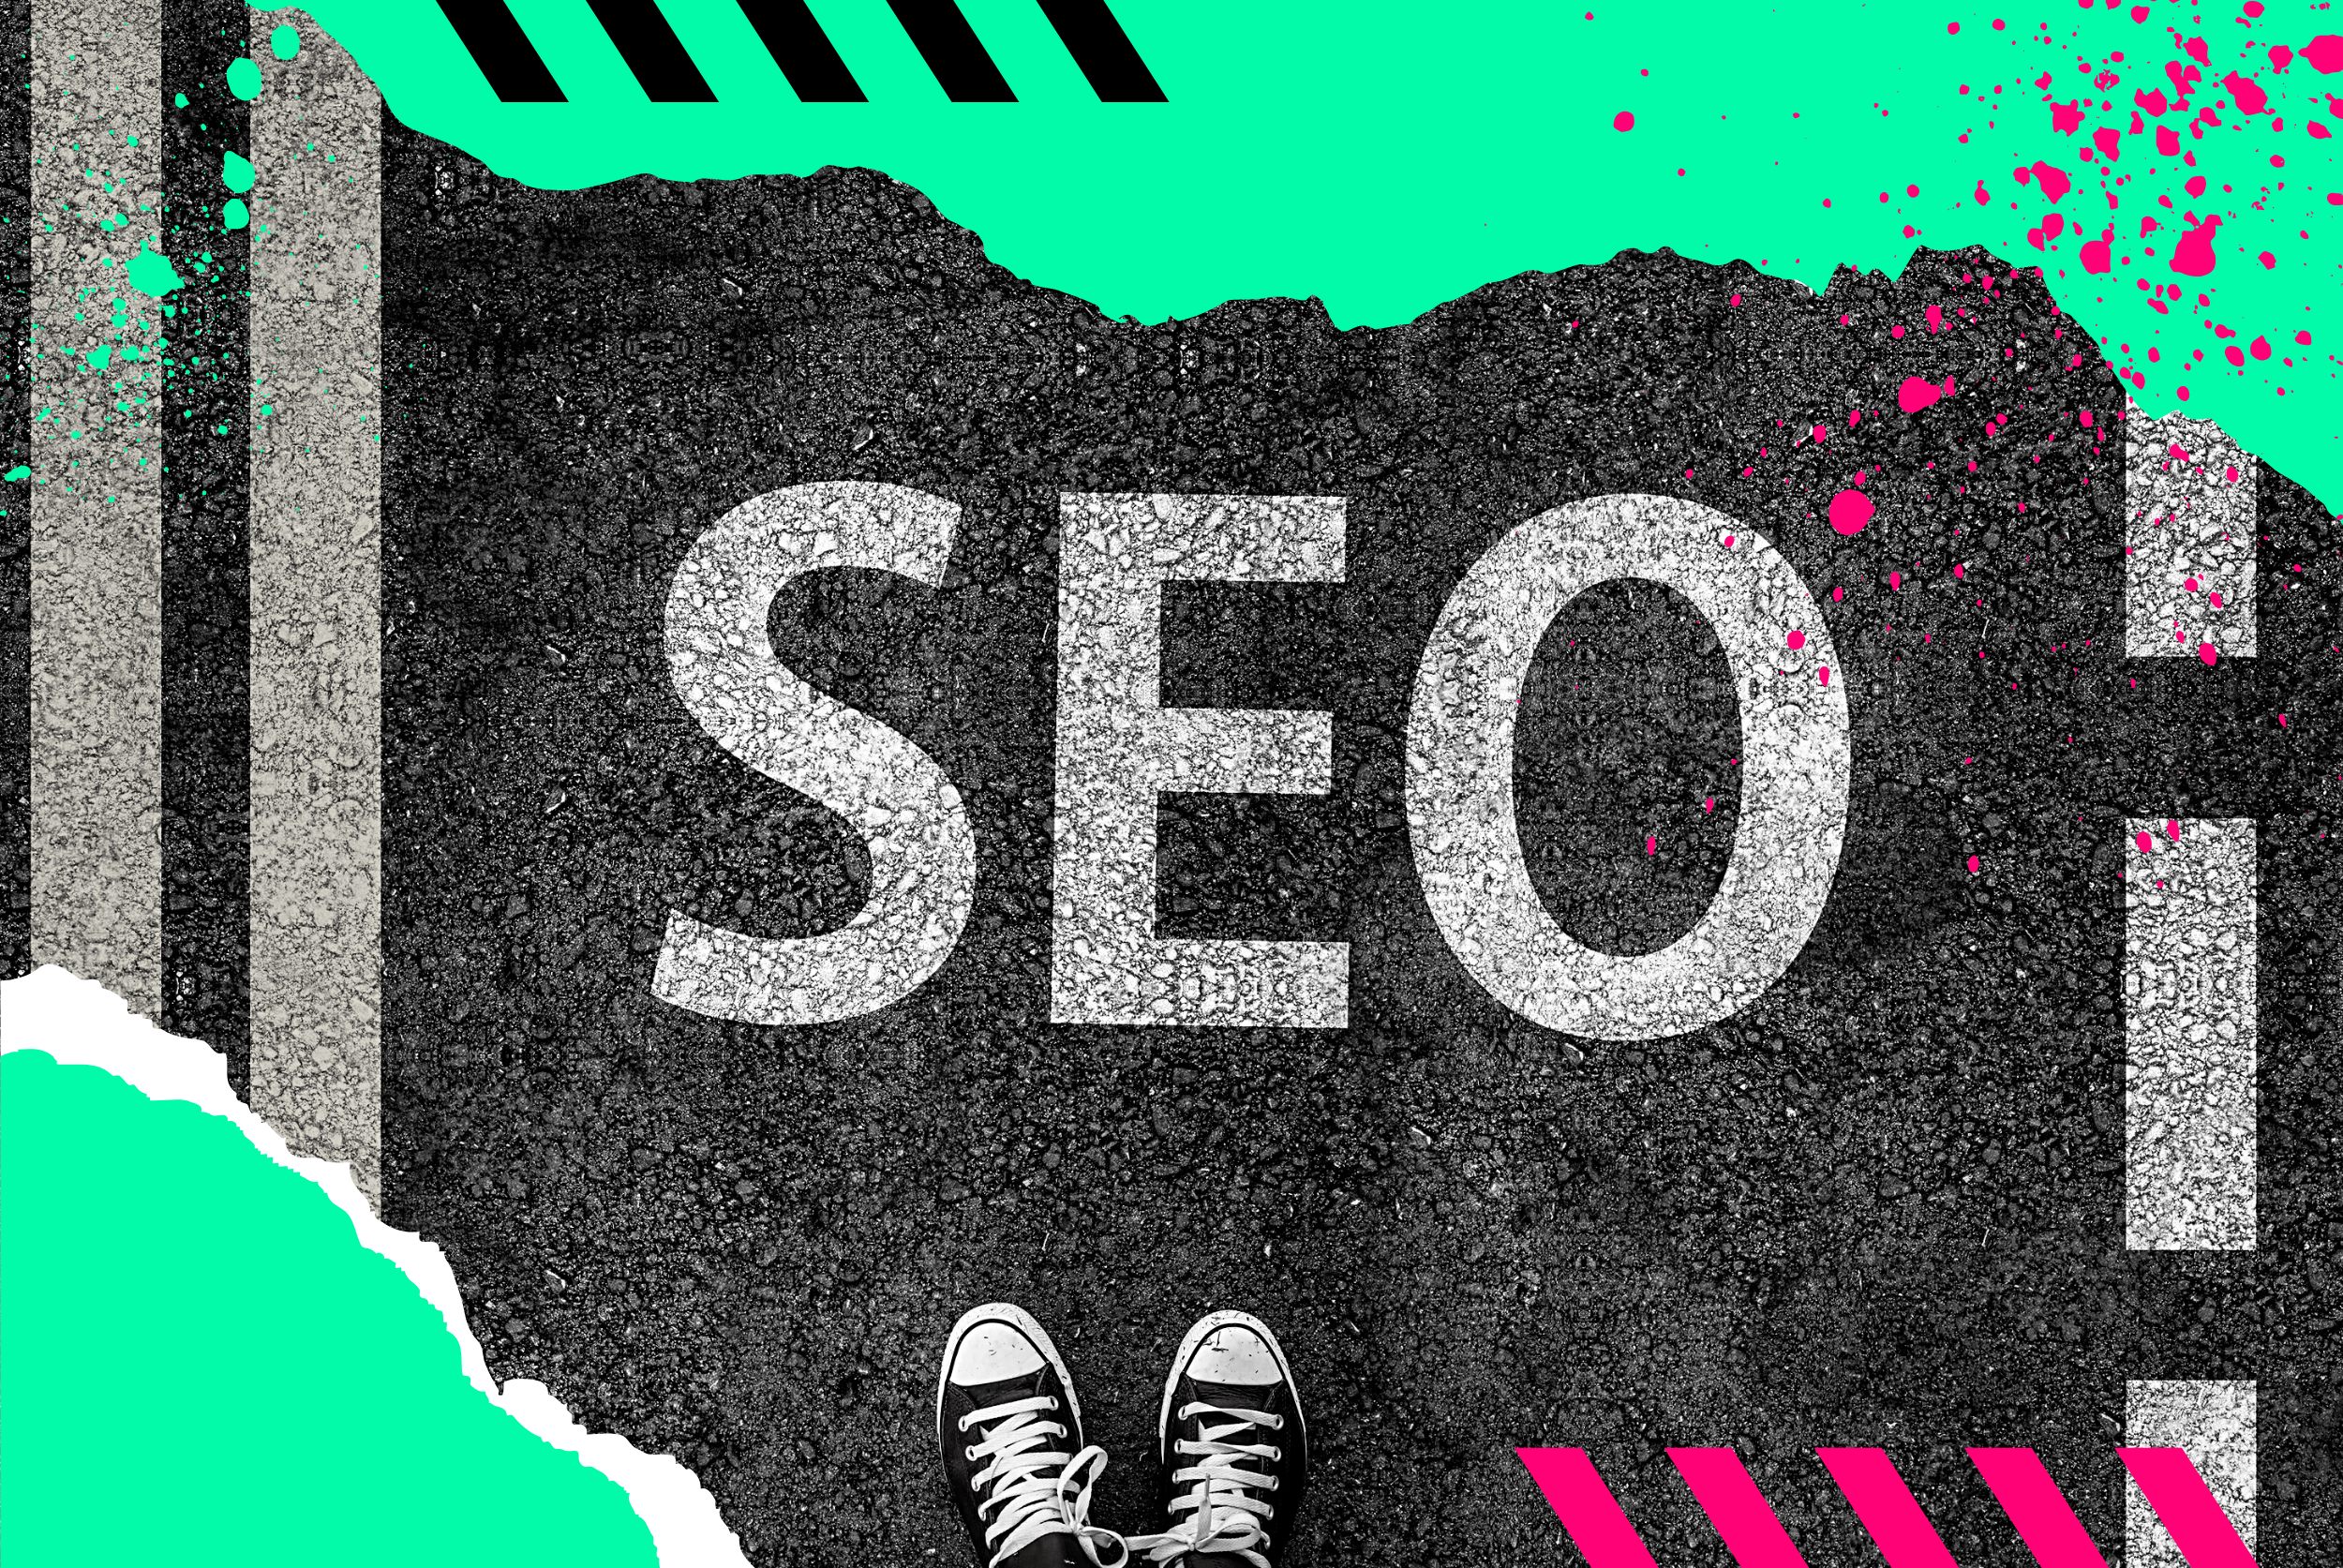 Hook ‘Em with SEO: How to Use Search Engine Optimisation for Better PR Results